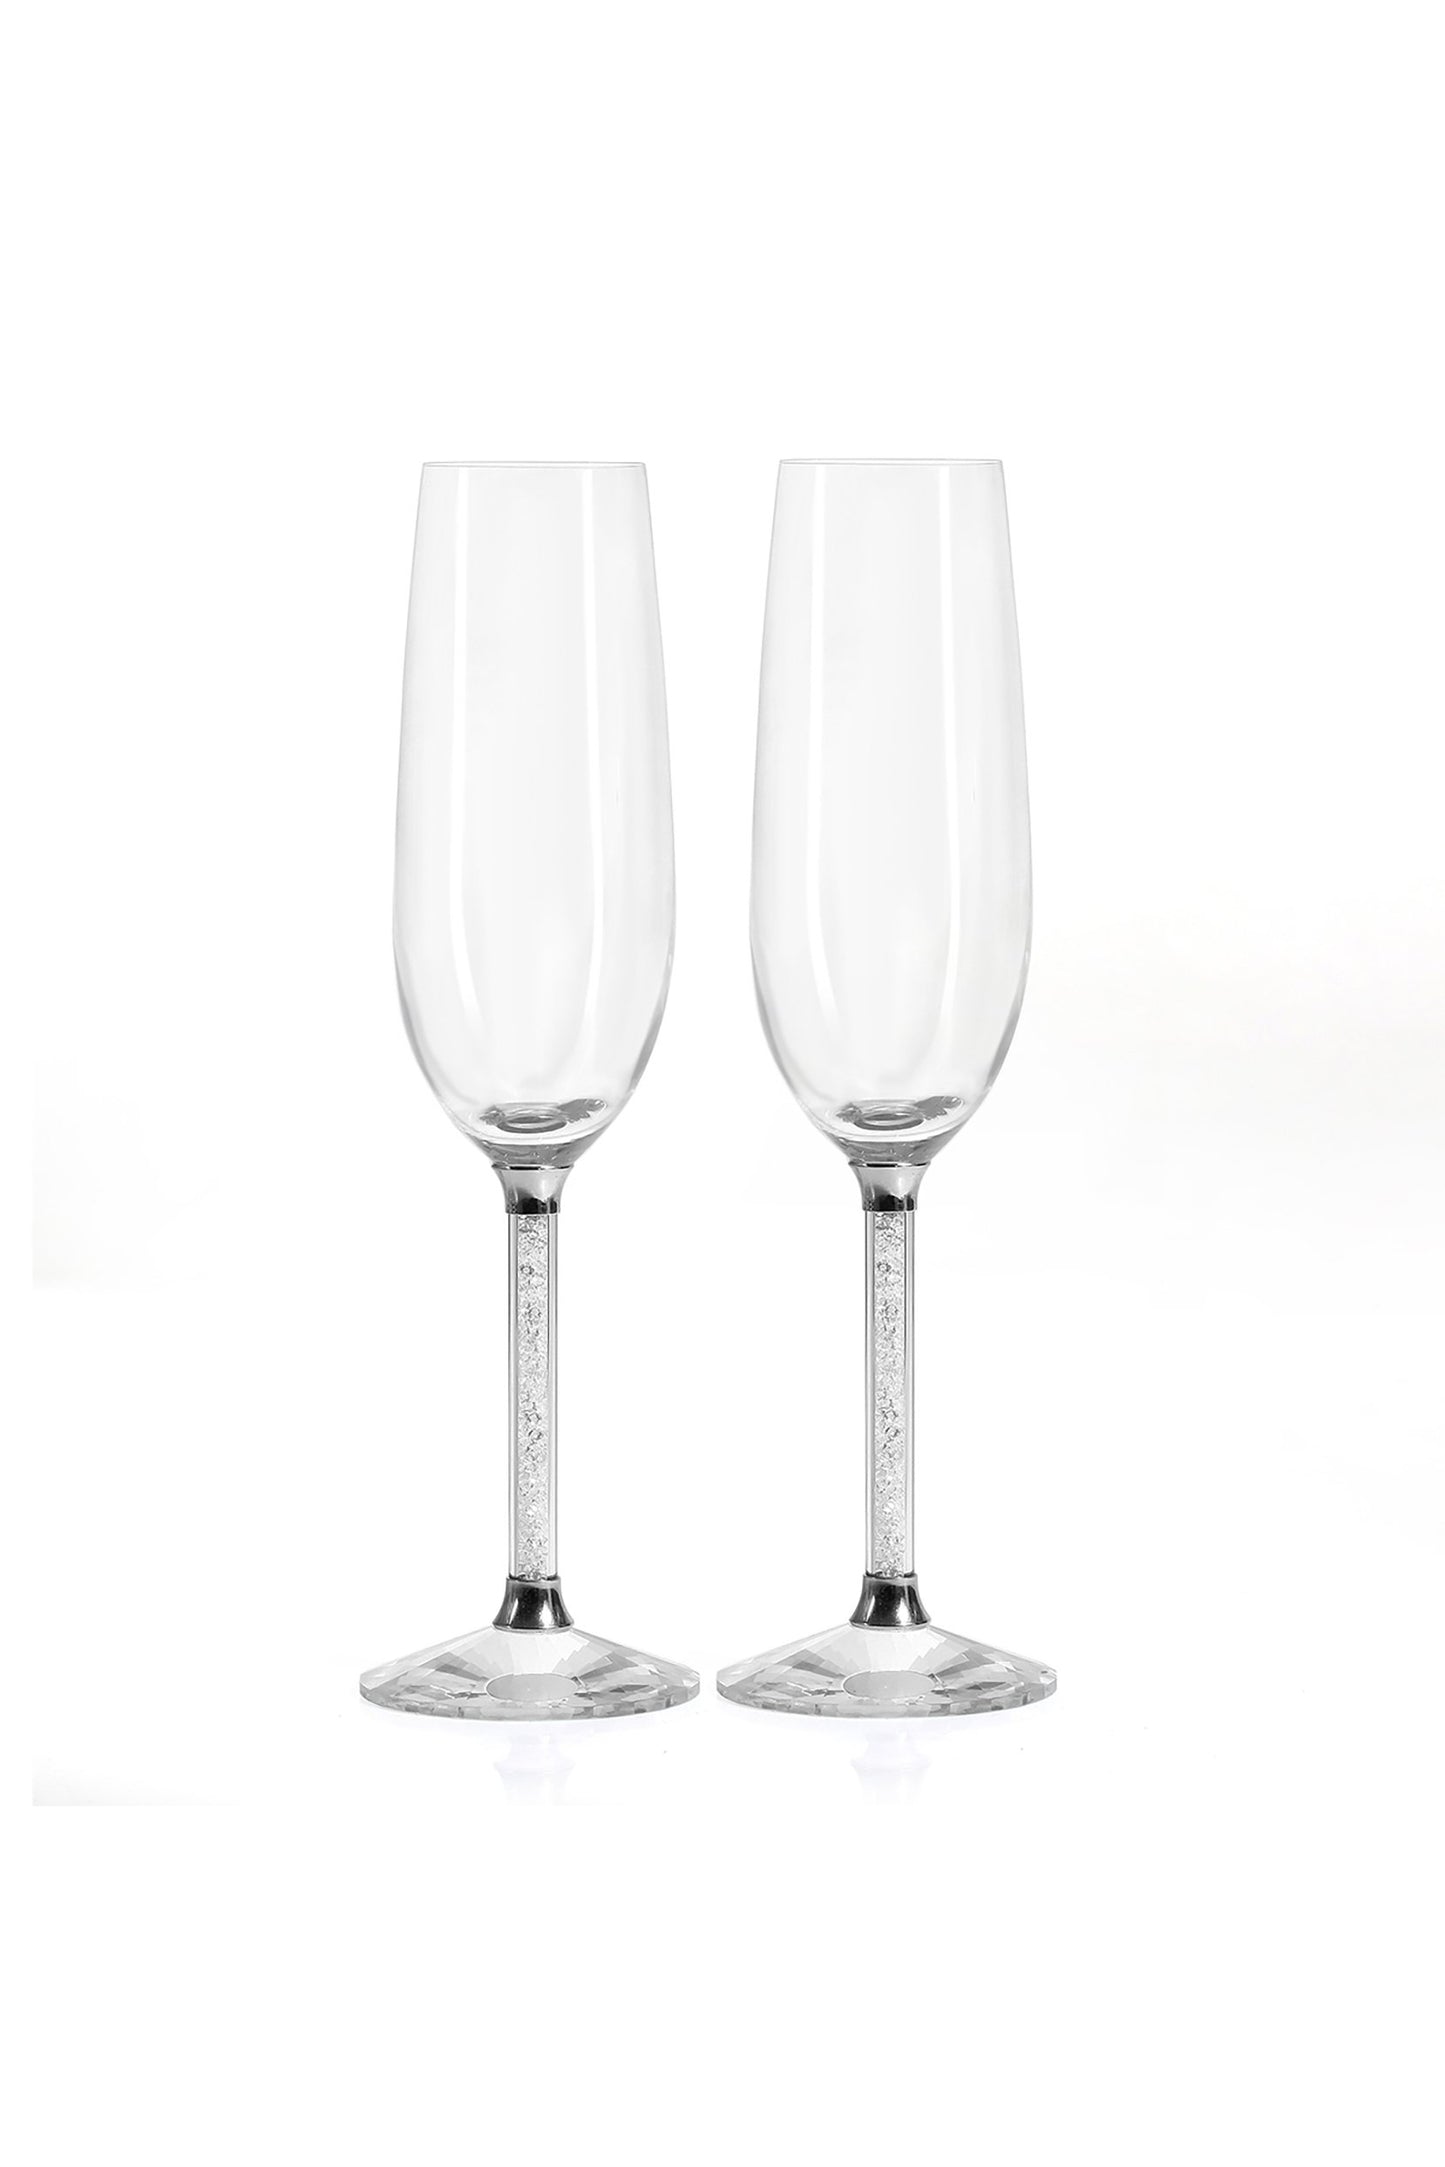 Always and Forever Crystal Champagne Flutes Set of 2 Pieces Wedding Toasting Flutes Crystal Glass Anniversary Gifts Wedding Couples Gift CGF0286 (Set of 1 pcs)